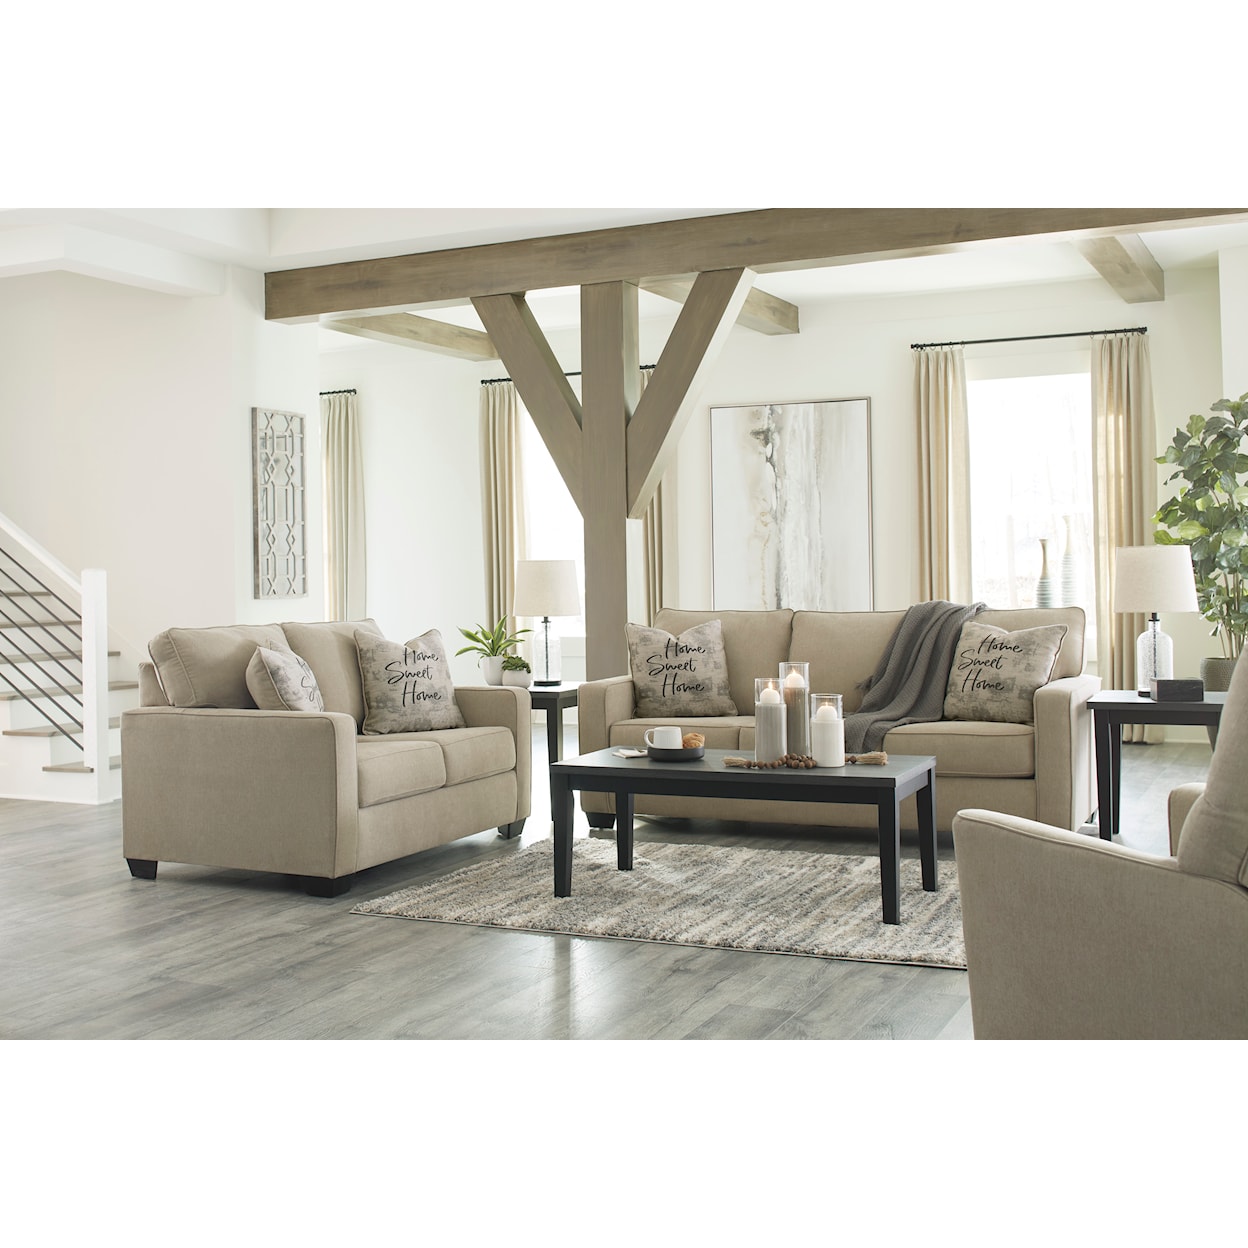 Signature Design by Ashley Lucina Living Room Set